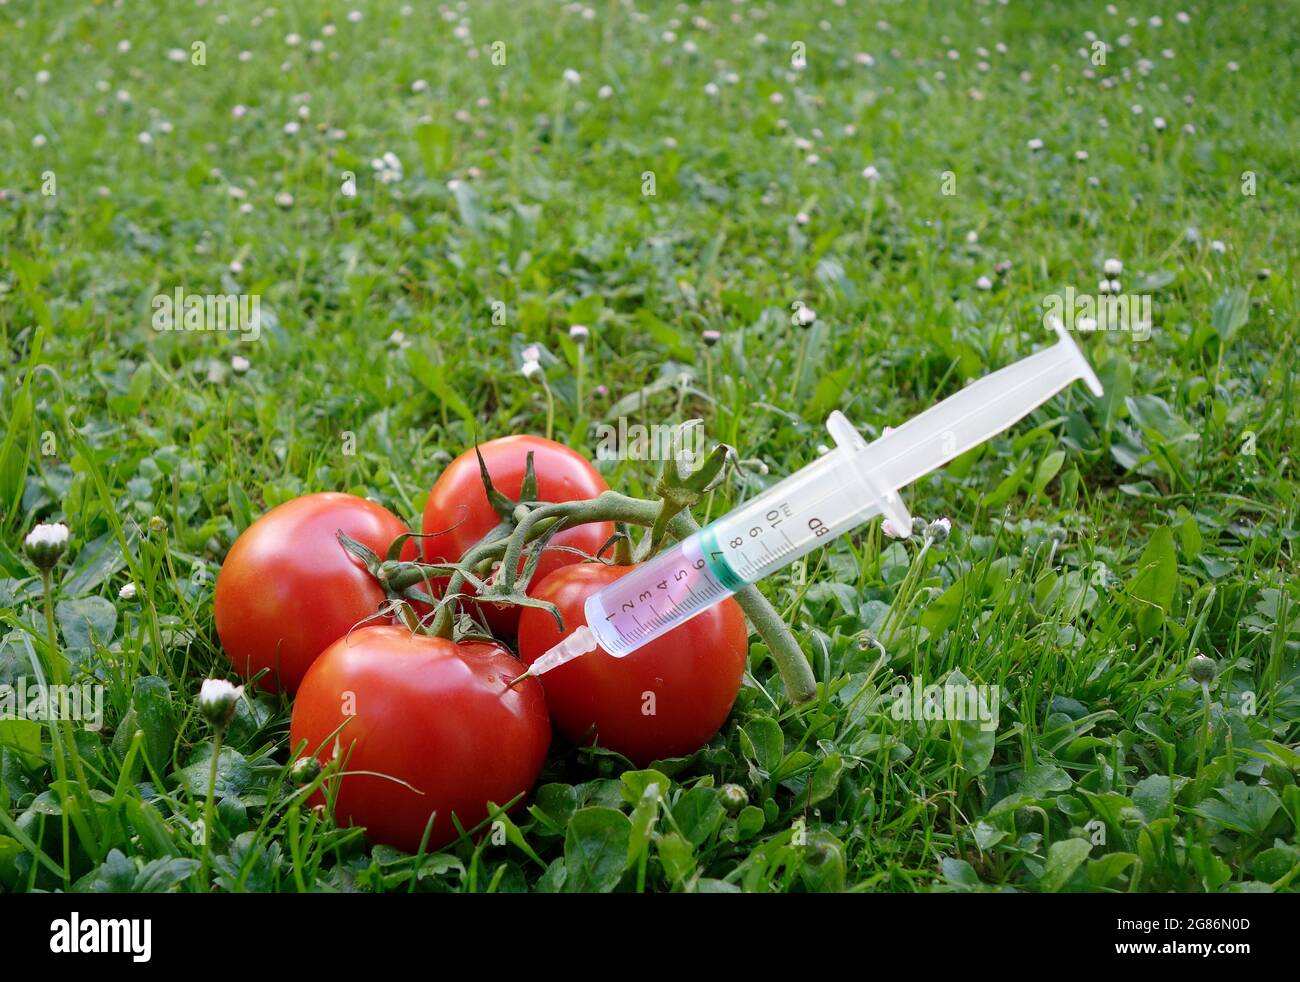 Tomatoes being injected with syringe Stock Photo